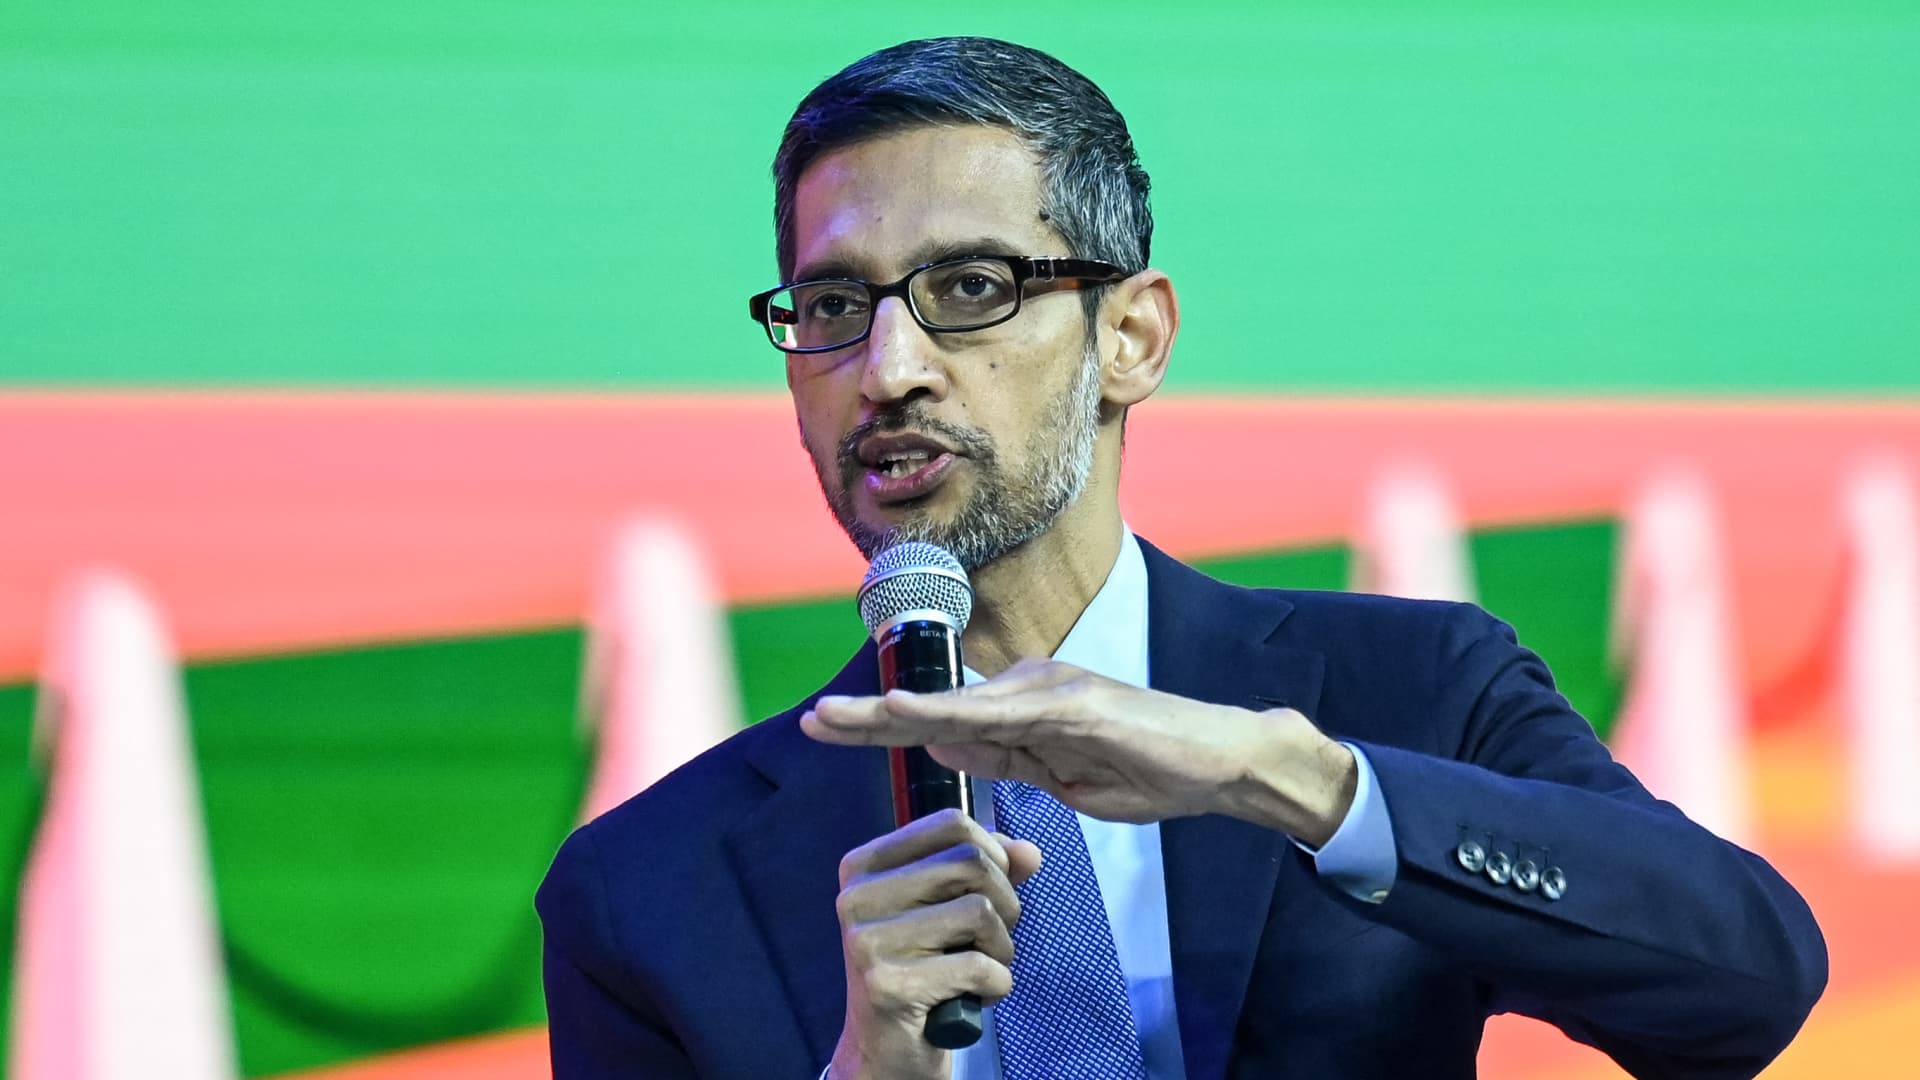 Google CEO issues Bard chatbot rallying cry in internal memo